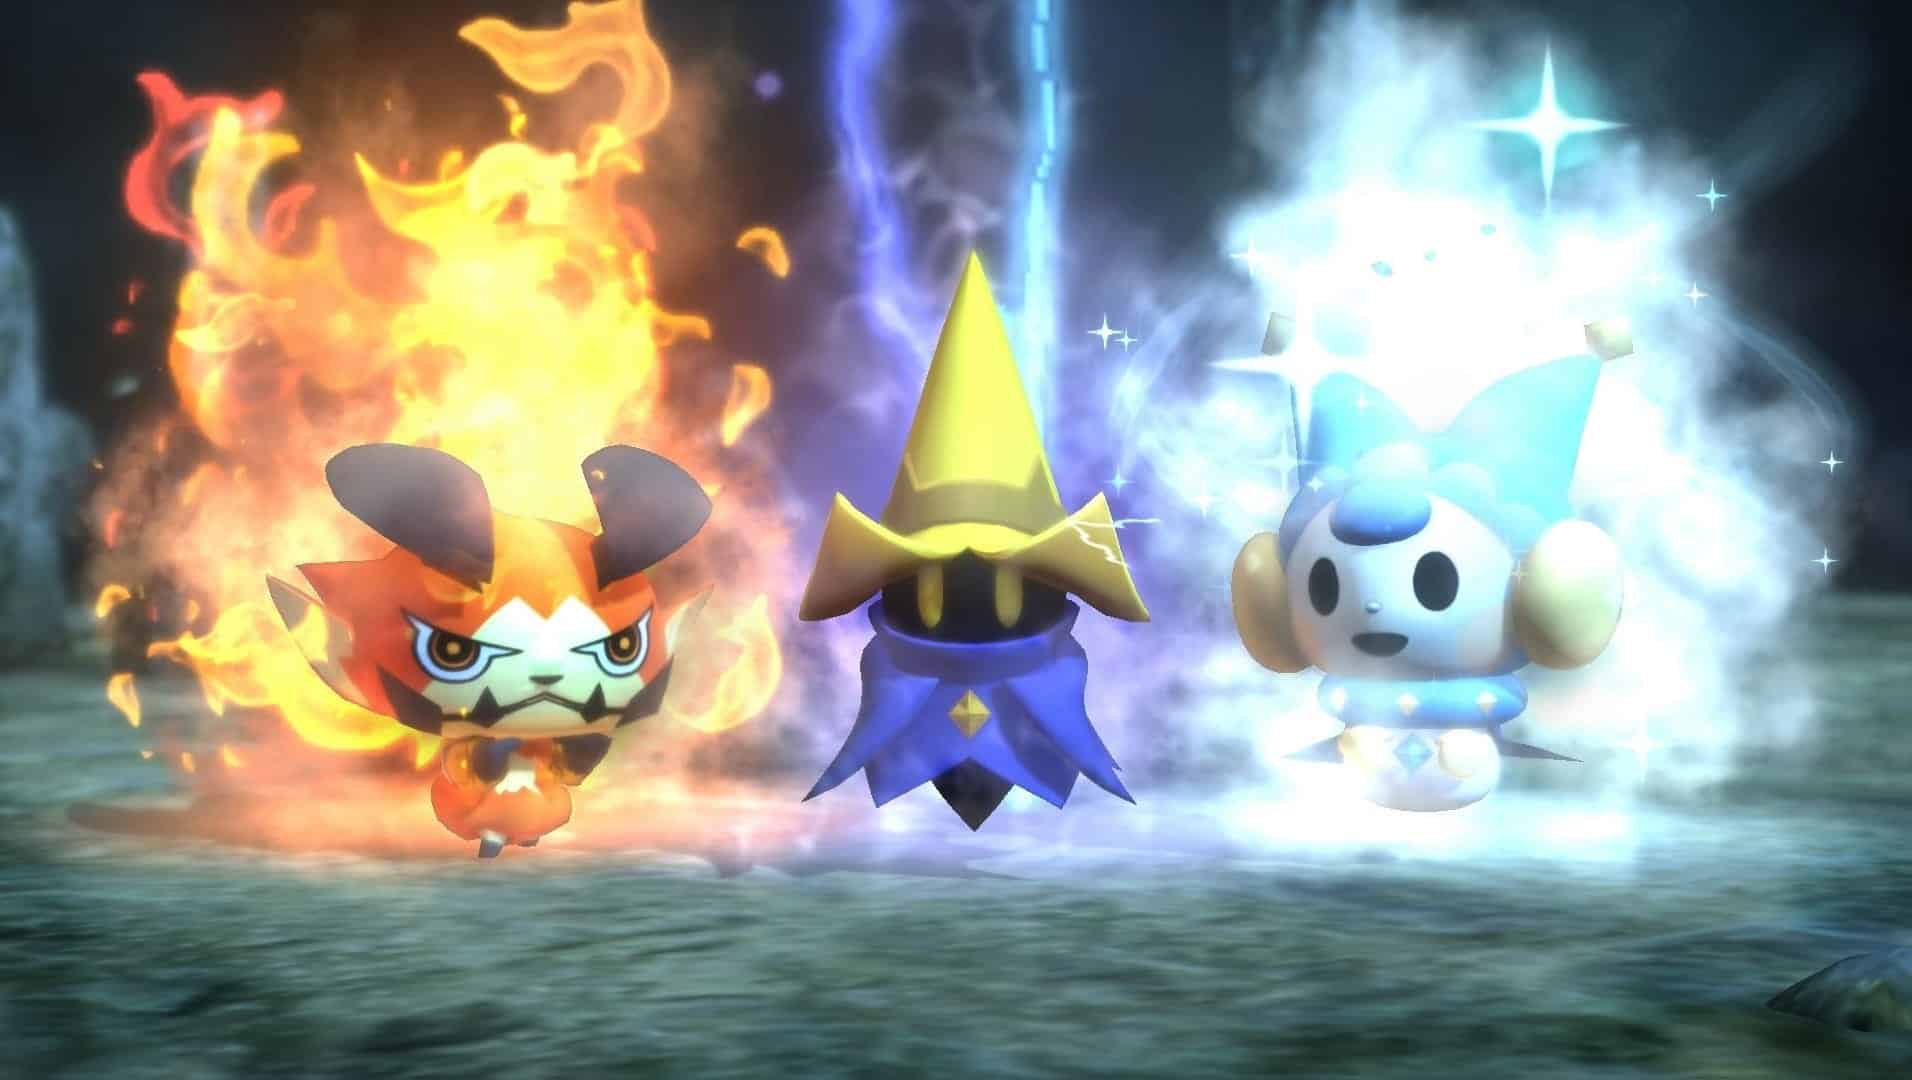 World of Final Fantasy - Mirages